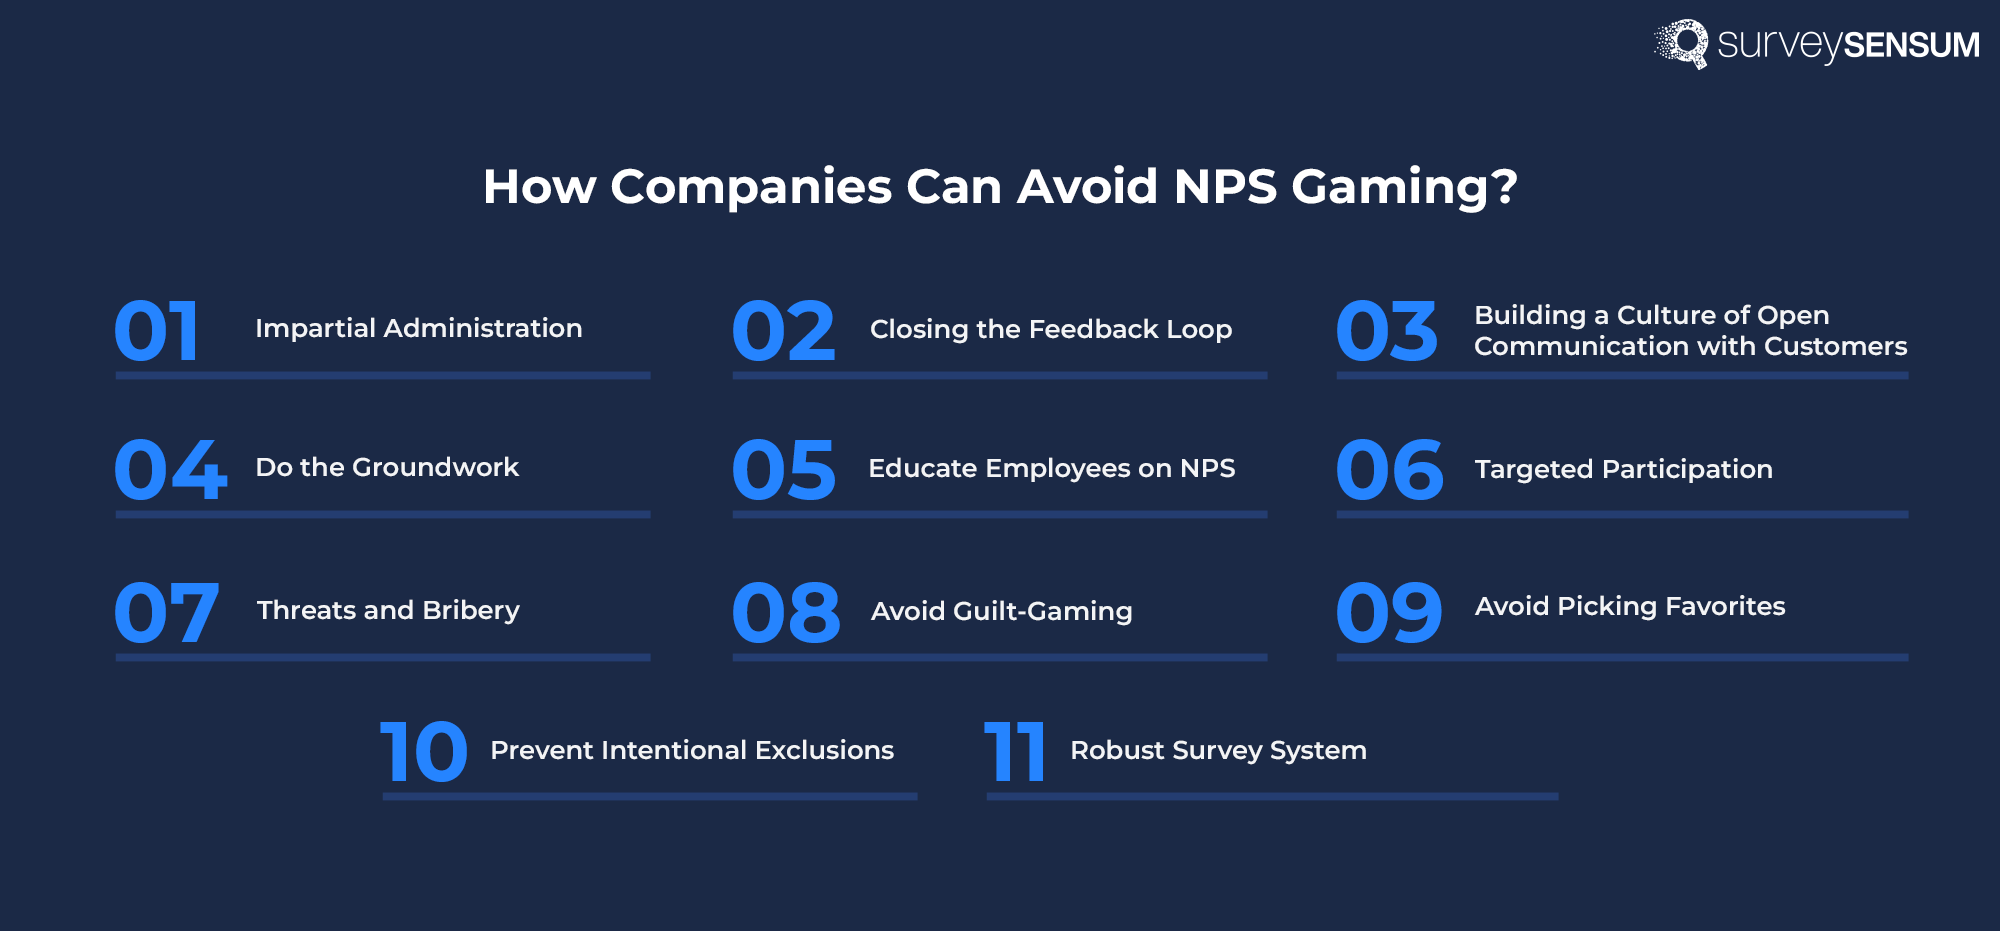 The image shows all the strategies that can be used to stop NPS gaming. 